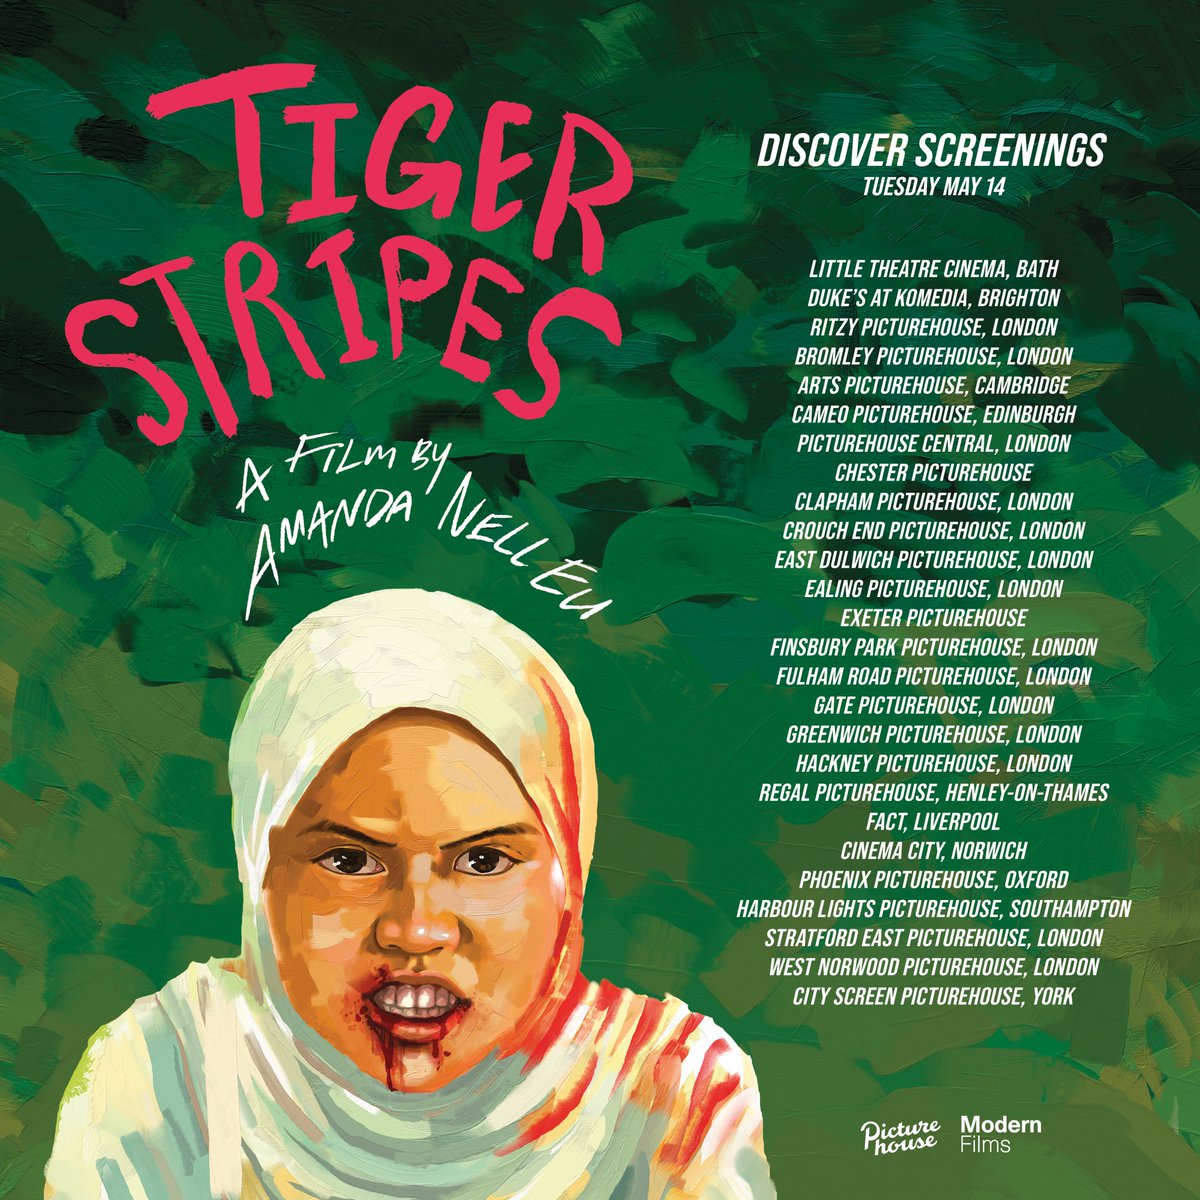 TIGER STRIPES will screen in @picturehouses nationwide on May 14 as part of their Discover programme. Catch Amanda Nell Eu’s Cannes award-winning film on the big screen ahead of release! Book tickets now: modernfilms.com/tigerstripes